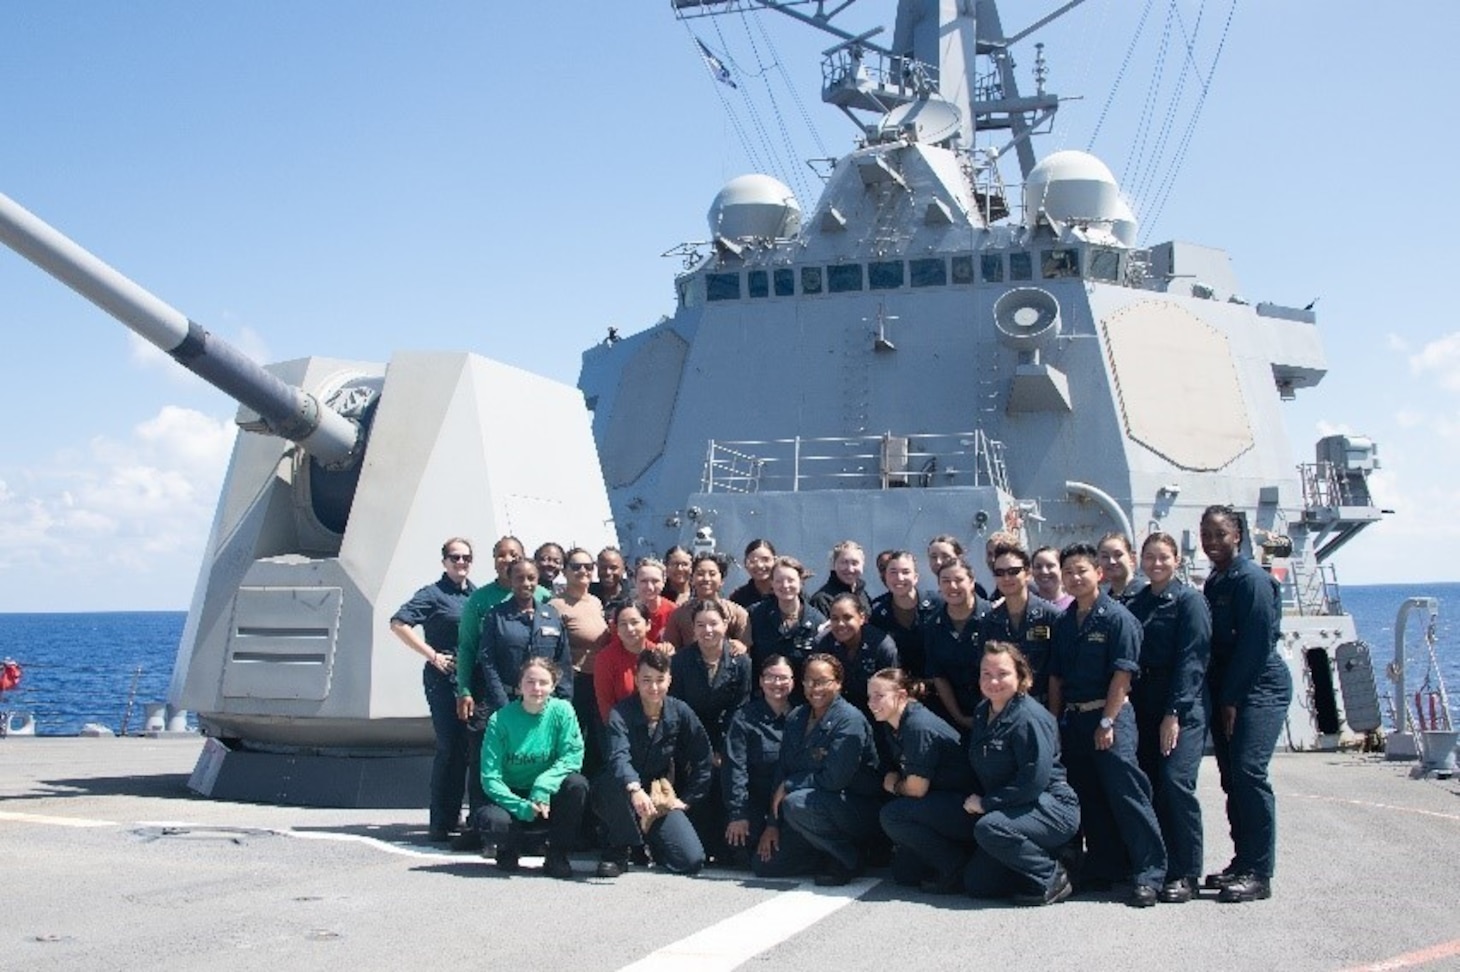 Sailors assigned to the Arleigh Burke-class guided-missile destroyer USS Forrest Sherman (DDG 98) take a photo on the foc’sle after meeting to celebrate Women’s Equality Day. Forrest Sherman (DDG 98) is the flagship for Standing NATO Maritime Group Two (SNMG2), a multinational integrated task group that projects a constant and visible reminder of the Alliance’s solidarity and cohesion afloat and provides the Alliance with a continuous maritime capability to perform a wide range of tasks, including exercises and real-world operations in periods of crisis and conflict.